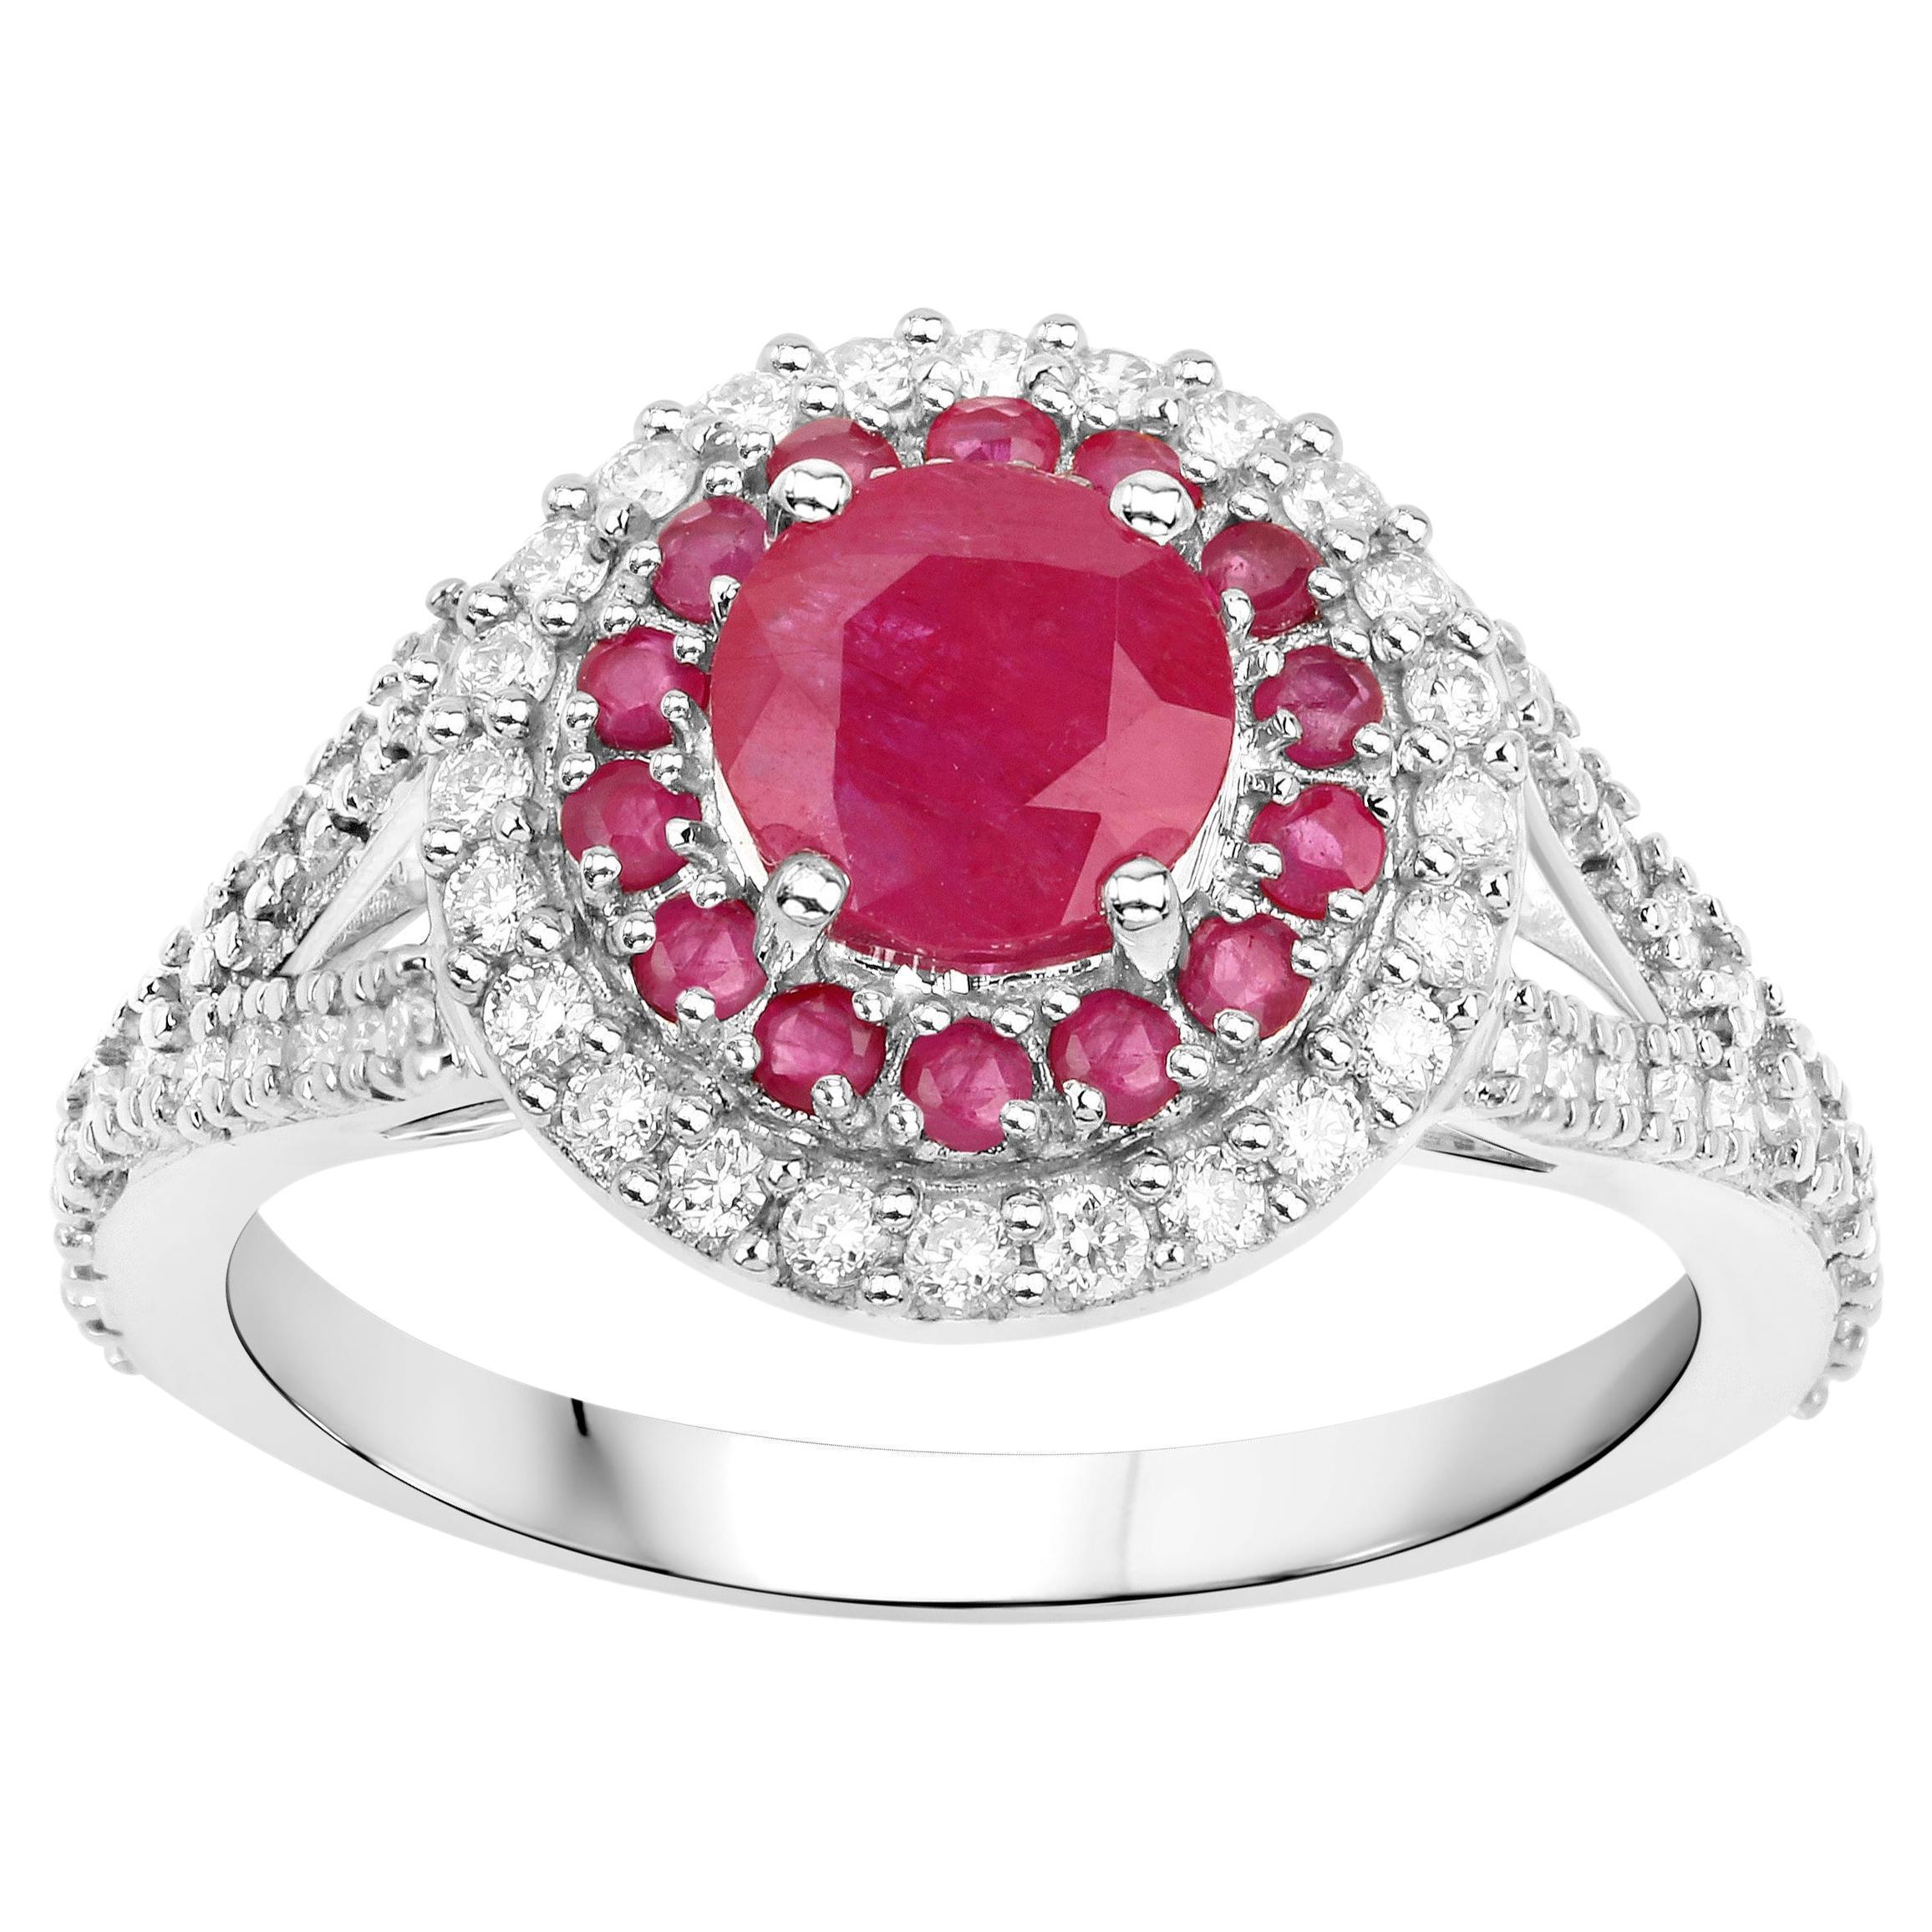 Round Cut Natural Ruby Ring With Diamonds 1.95 Carats 14K White Gold For Sale